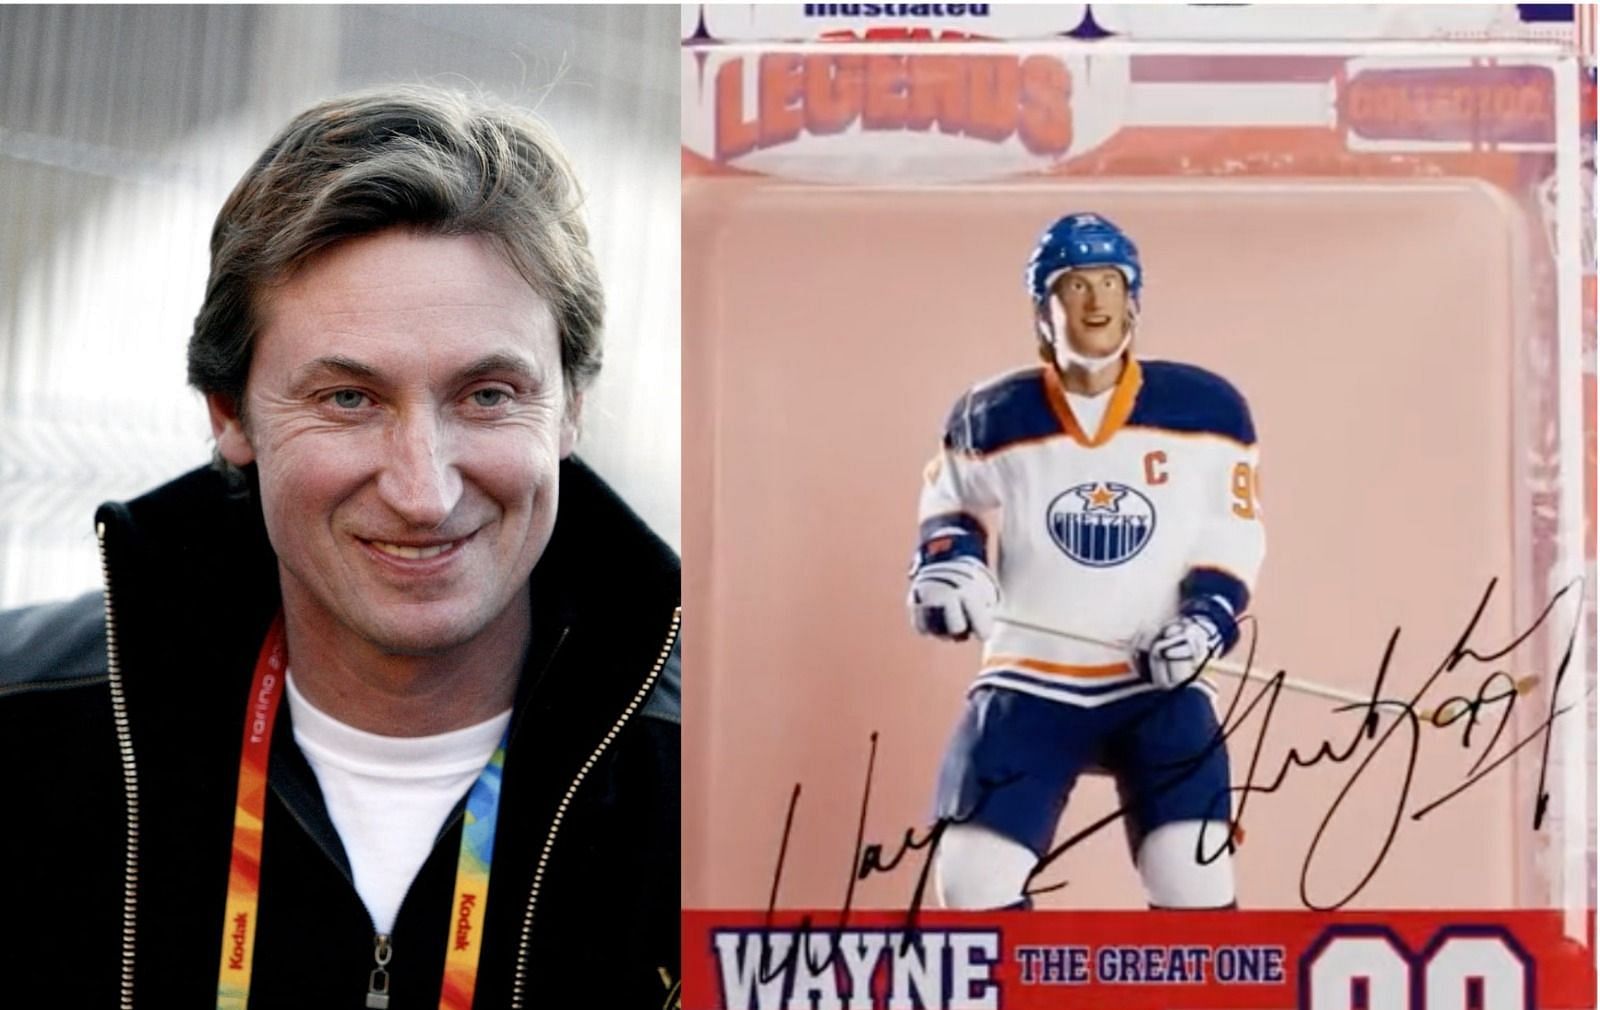 When Wayne Gretzky launched $10 NFTs as part of eBay